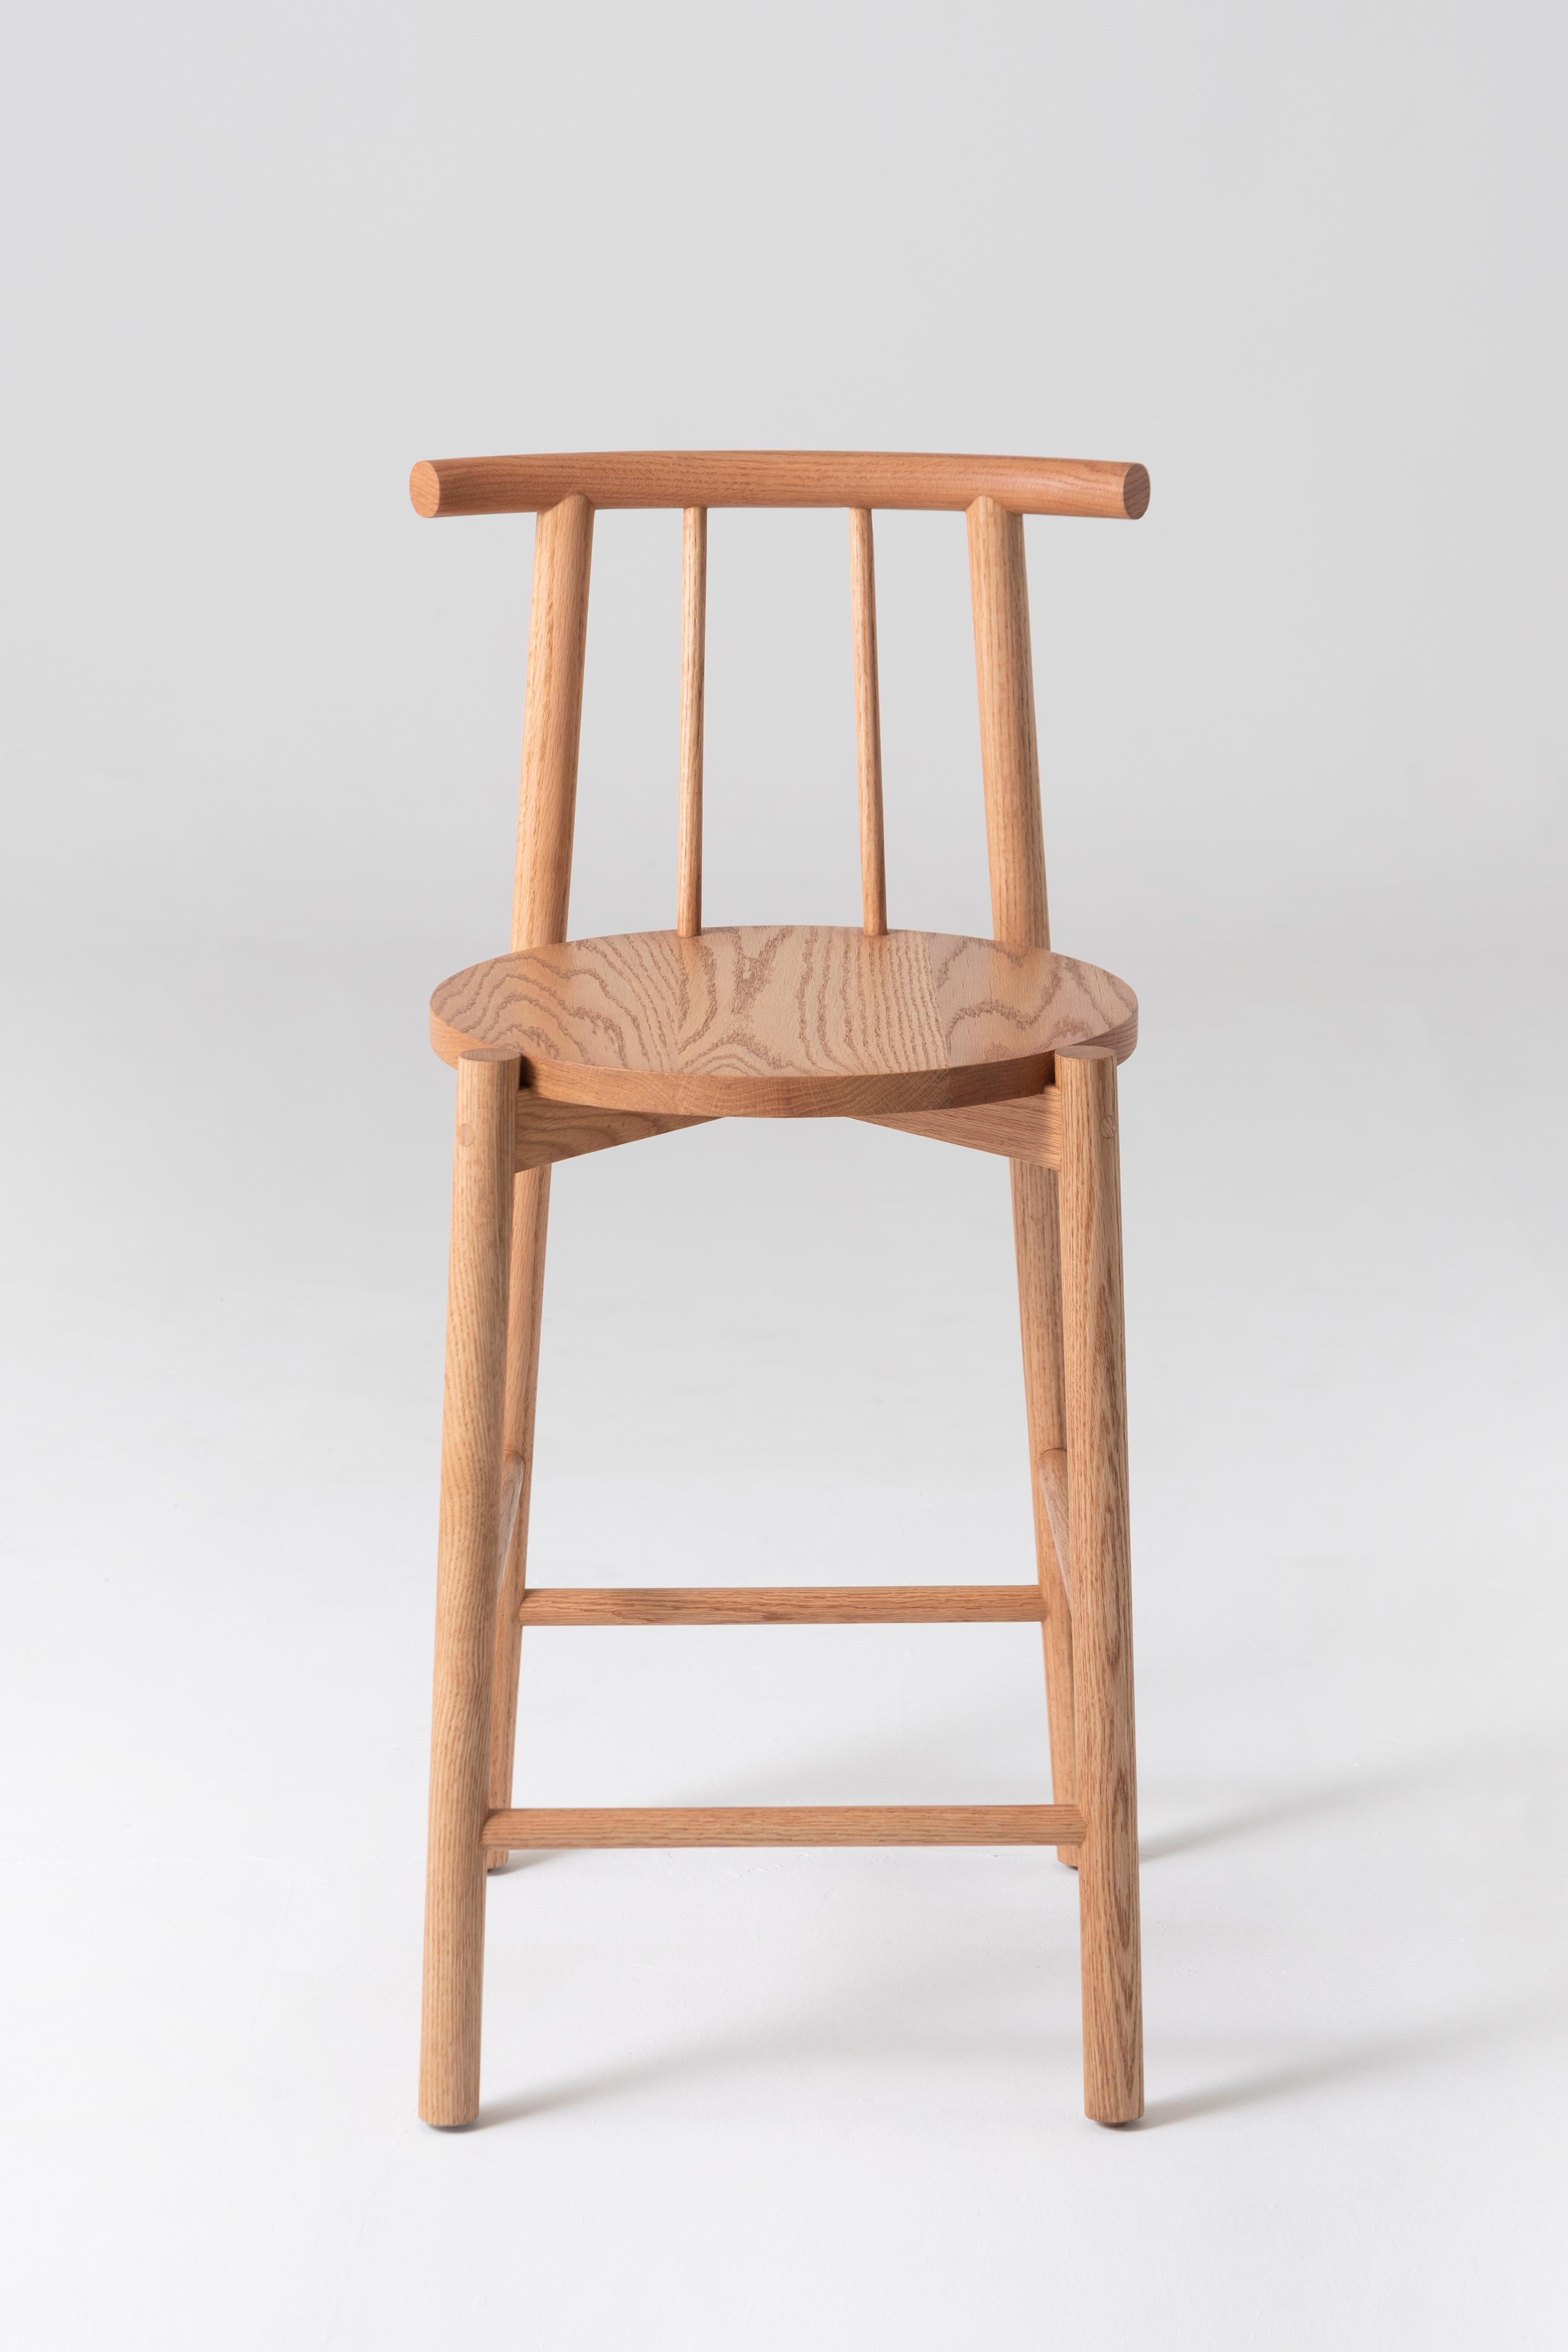 A stool for all occasions, from the ordinary to the extraordinary. This piece of furniture serves as a synthesis of structure and form, both remarked by its constructive clarity and silent beauty. 

Crafted in oak wood by fine cabinetmakers in